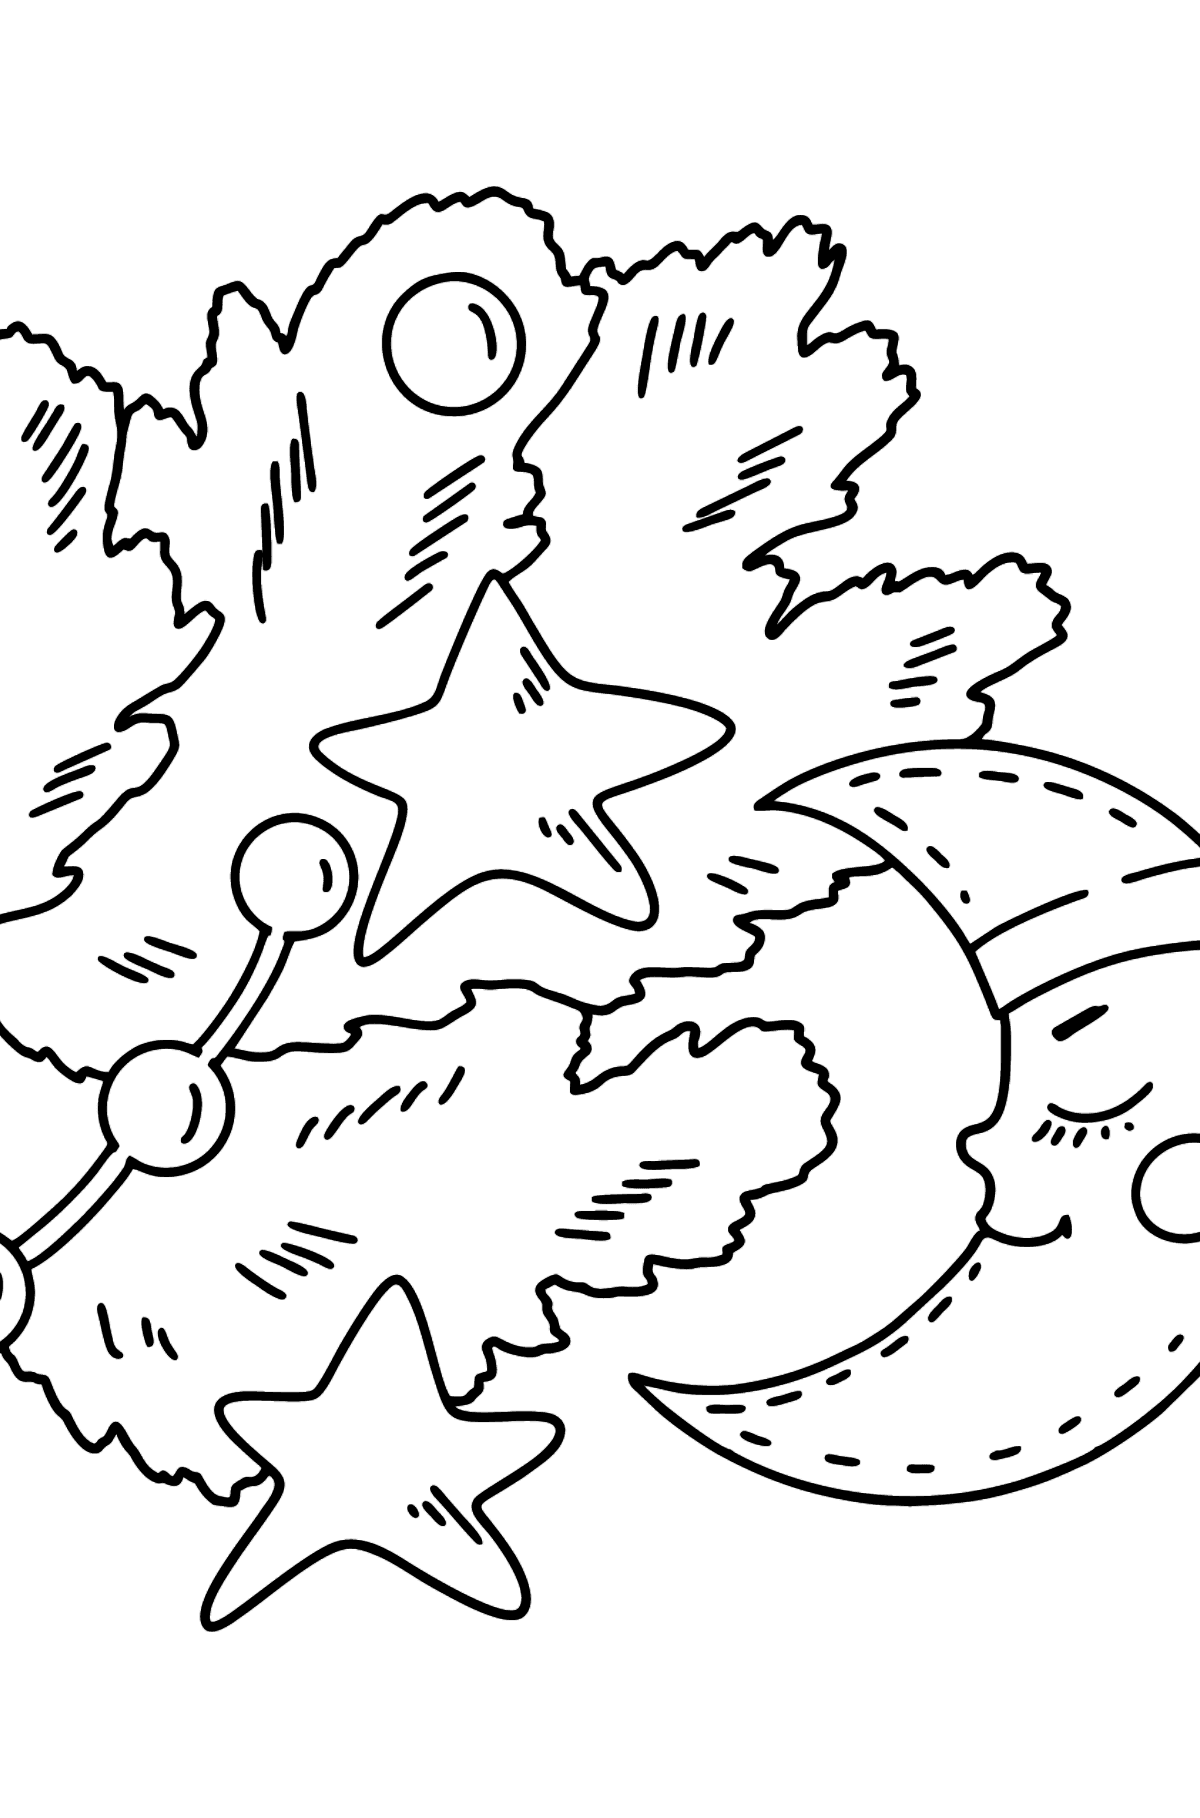 Decorated Fir Branch coloring page - Coloring Pages for Kids